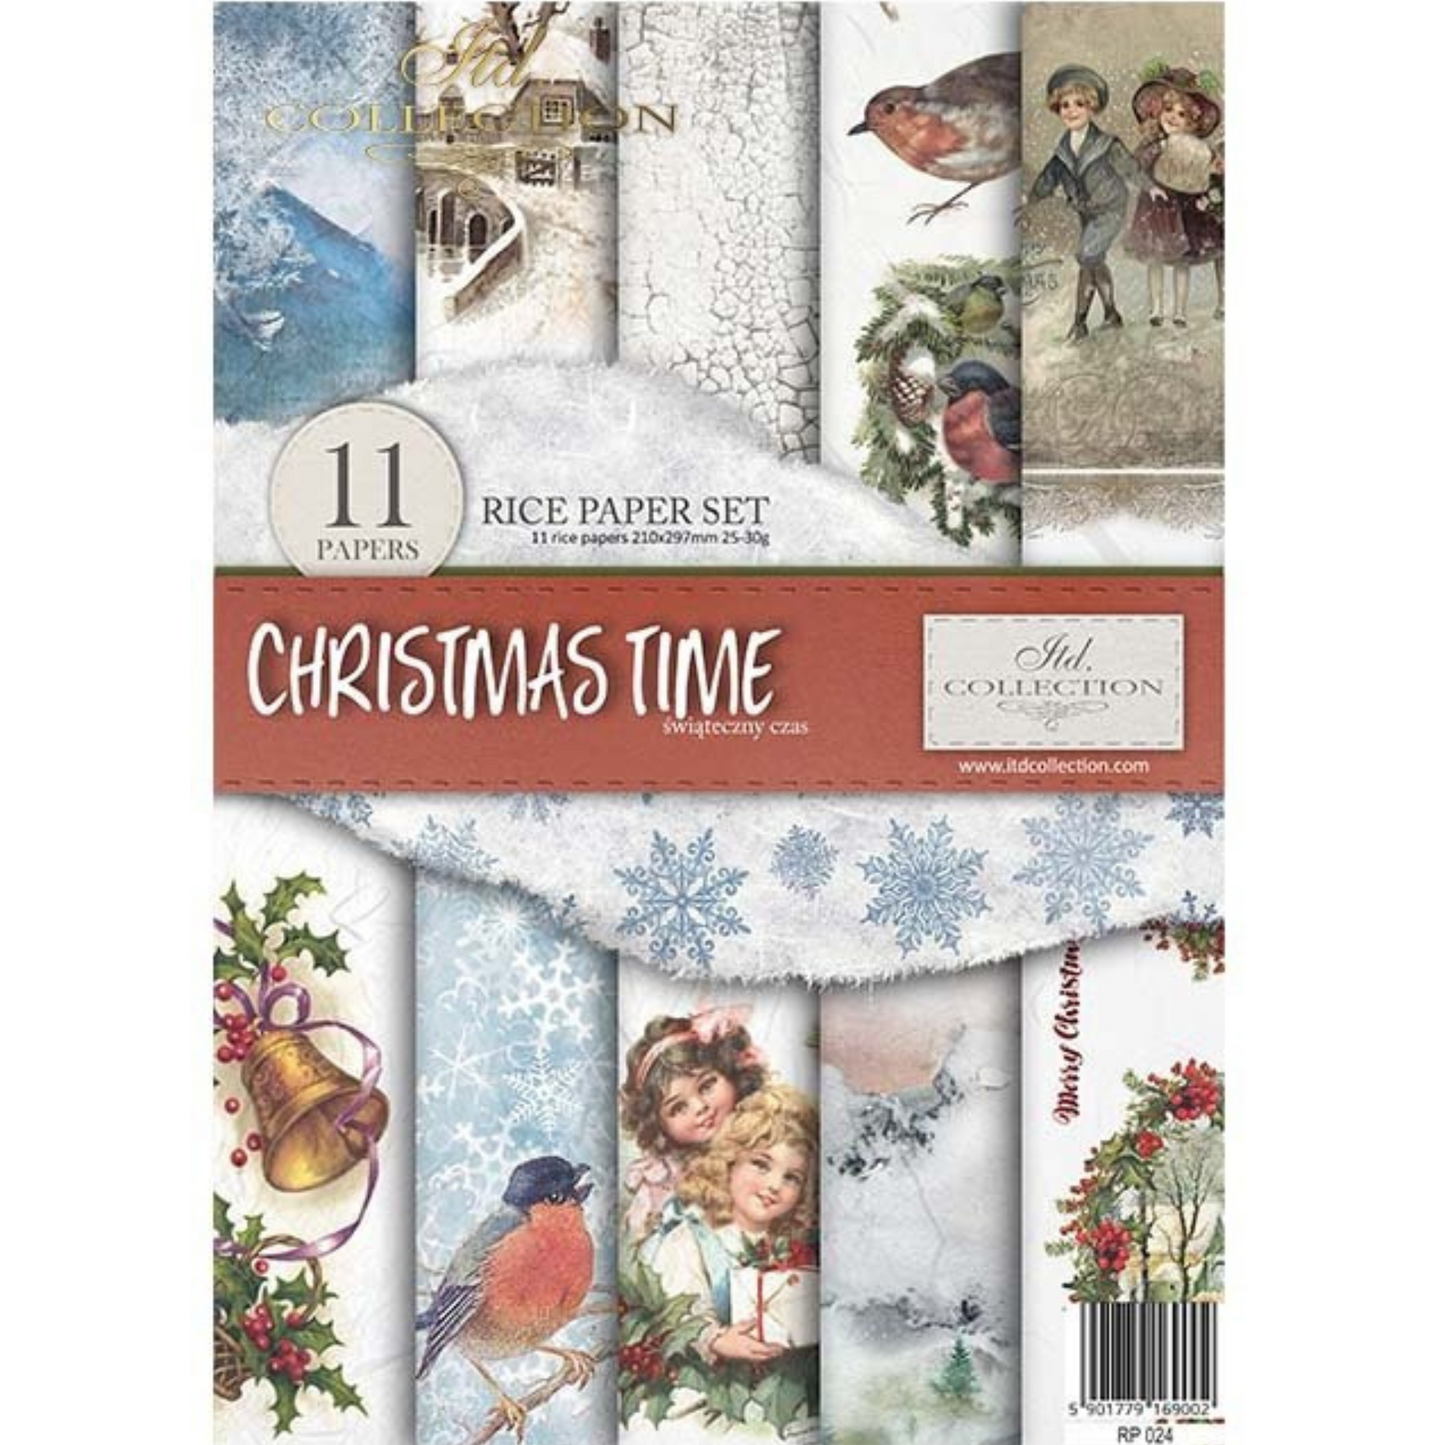 "Christmas Time" Decoupage Rice Paper set of eleven sheets by ITD Colleciton. Available at Milton's Daughter. Front cover iamge.